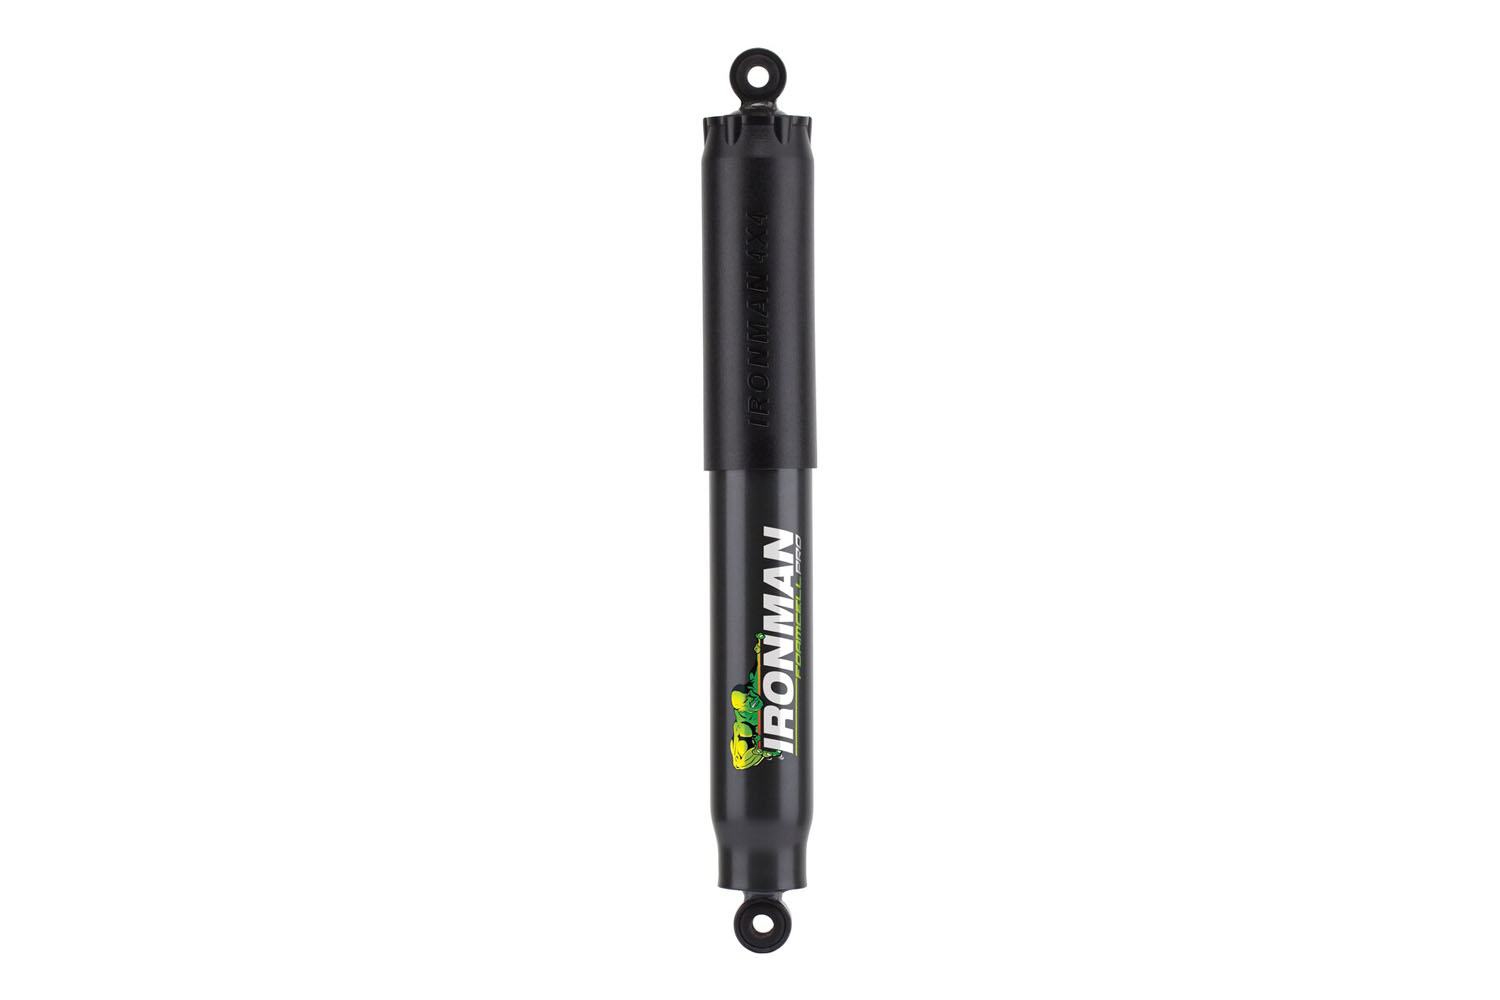 Can I install this shock in my truck if I have a 2-3 inches lift?